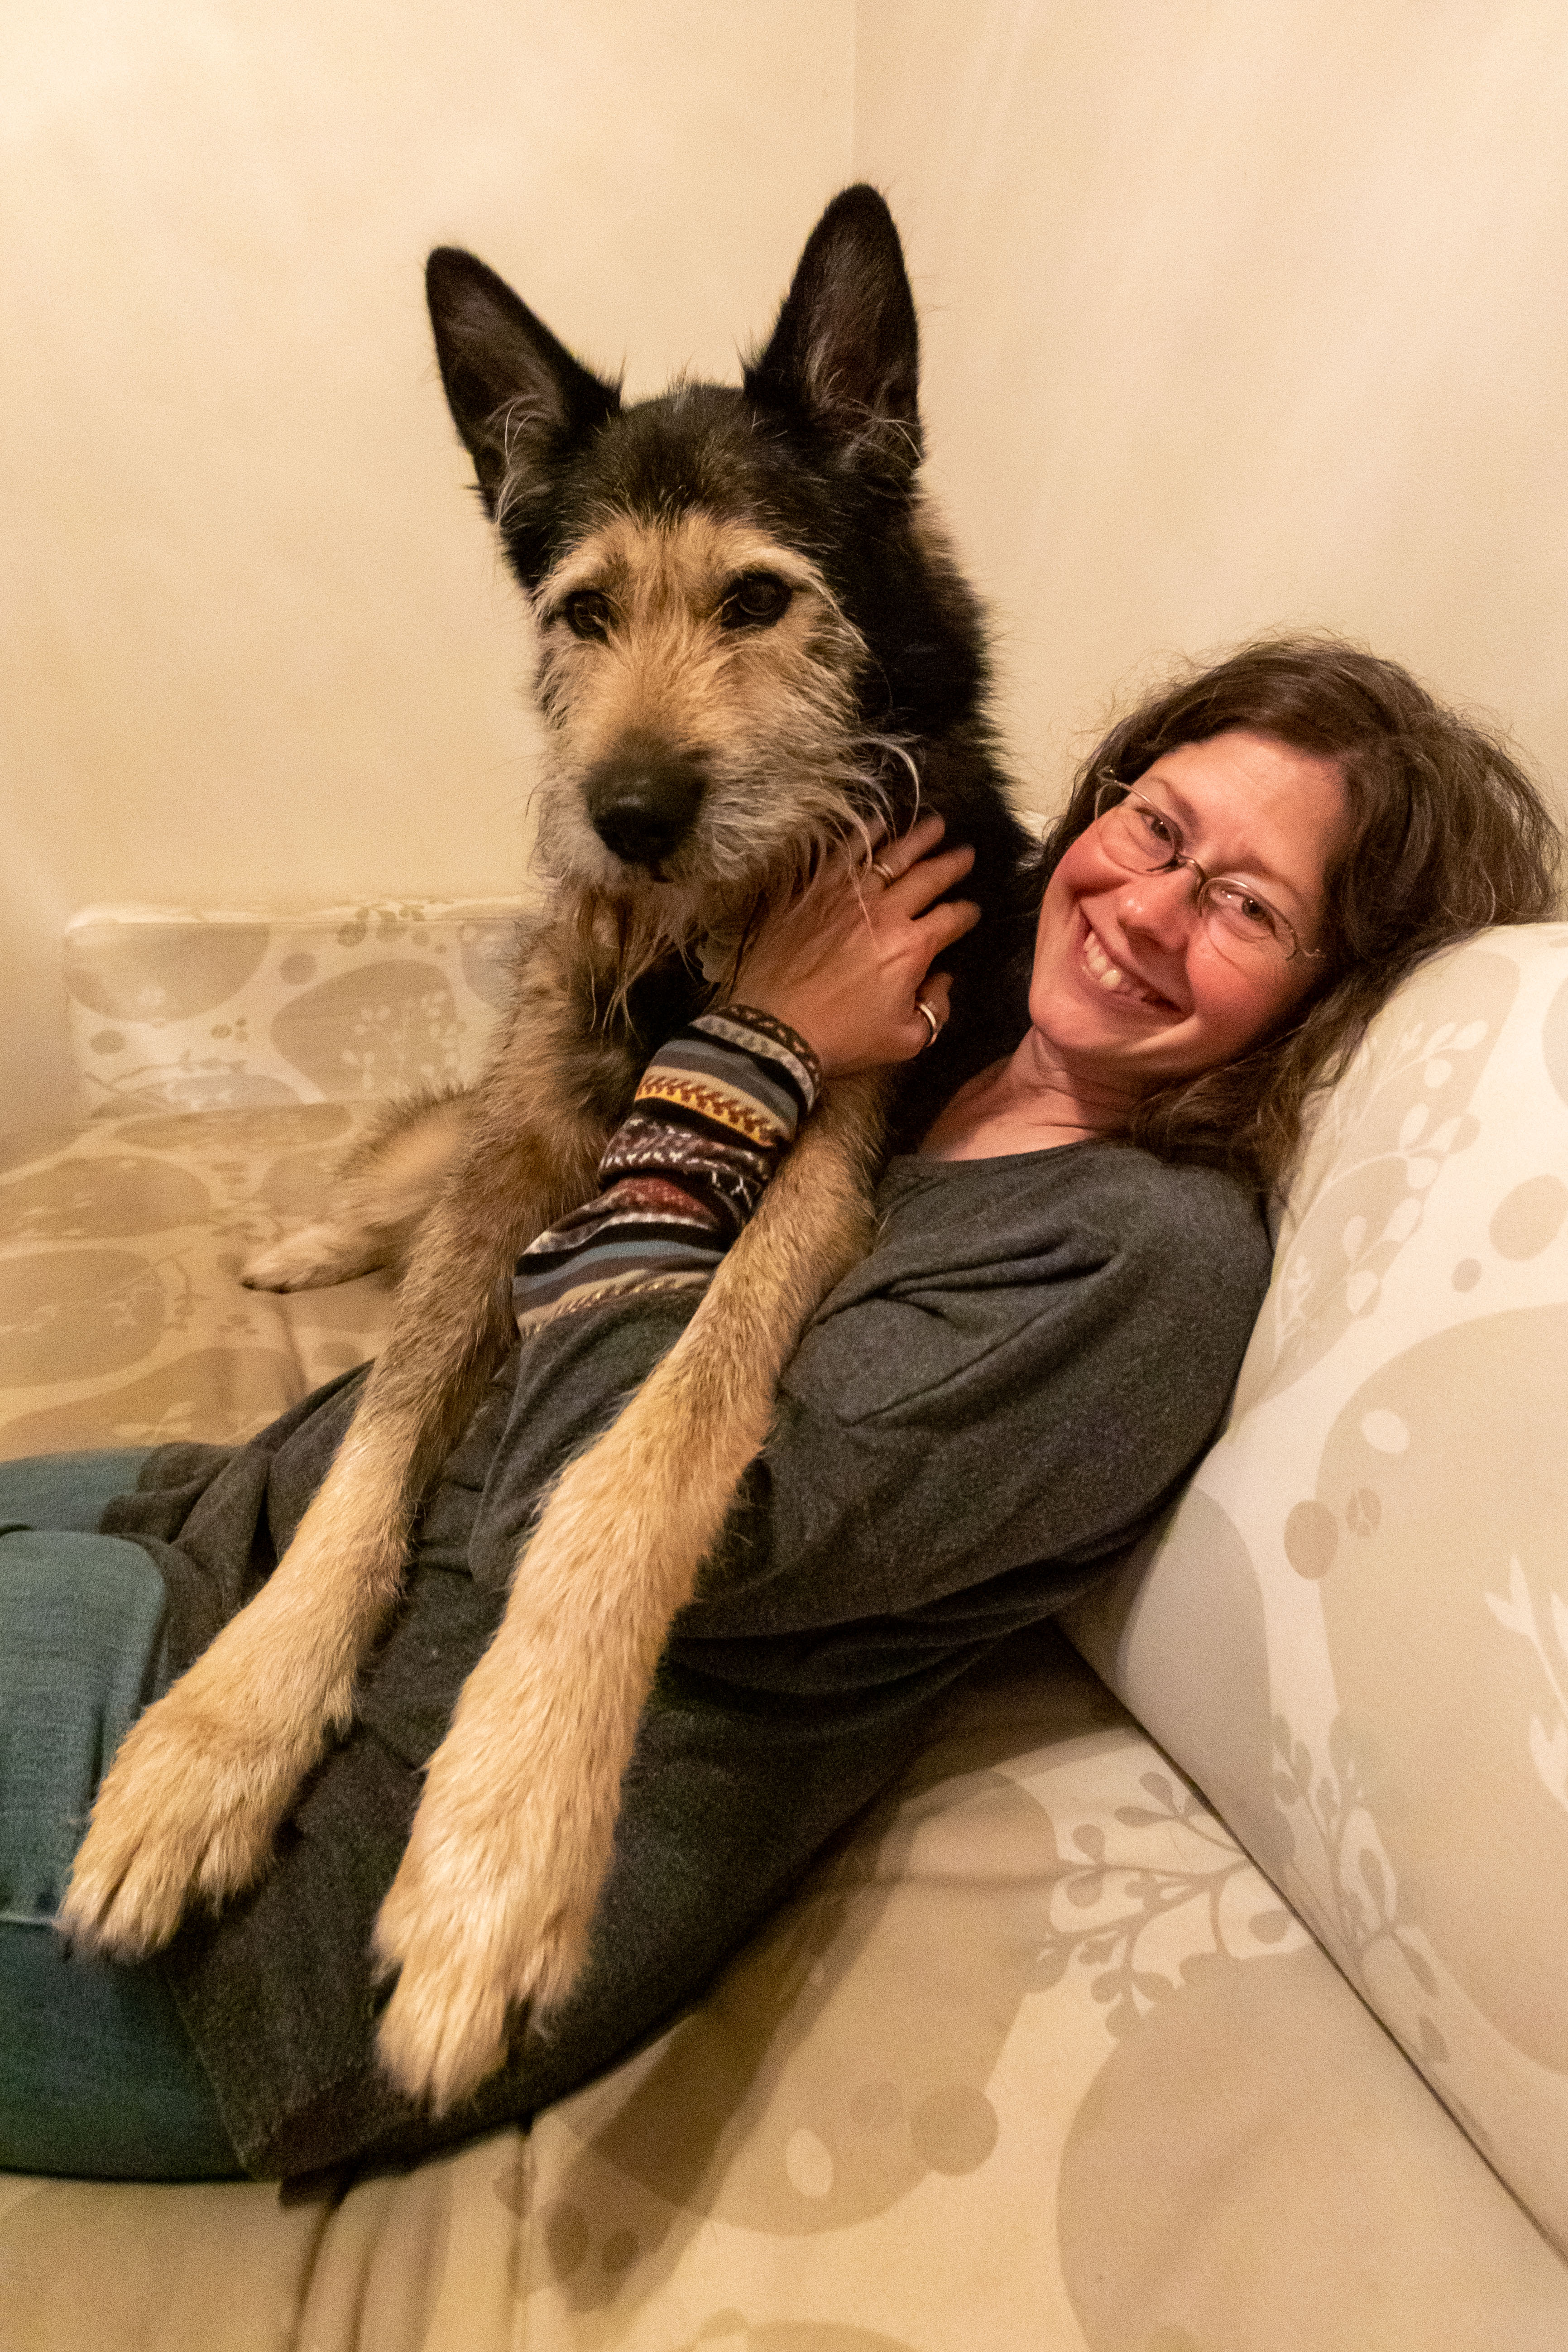 Beth with Old Boy, a Picardy Shepherd she petsat for on a road trip to Montreal